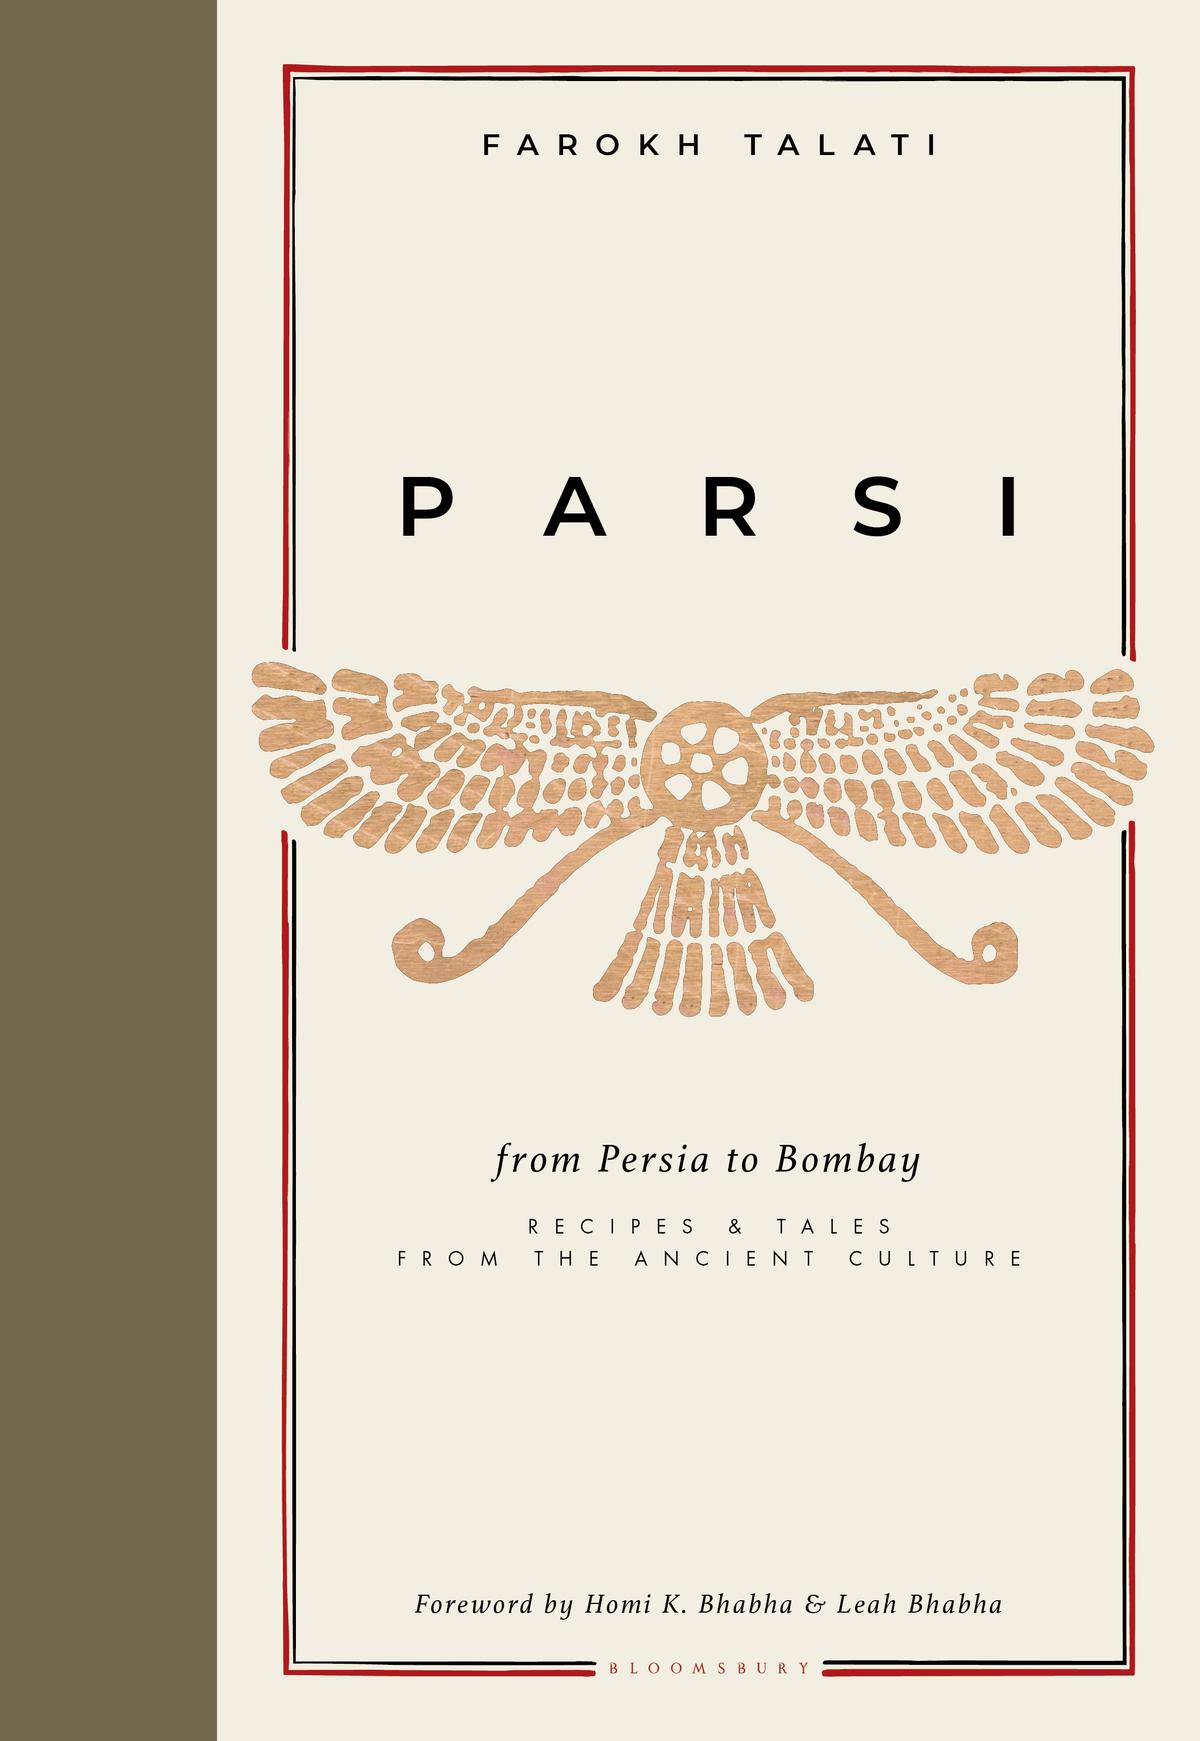 Parsi - From Persia to Bombay: Recipes & Tales from the Ancient Culture.